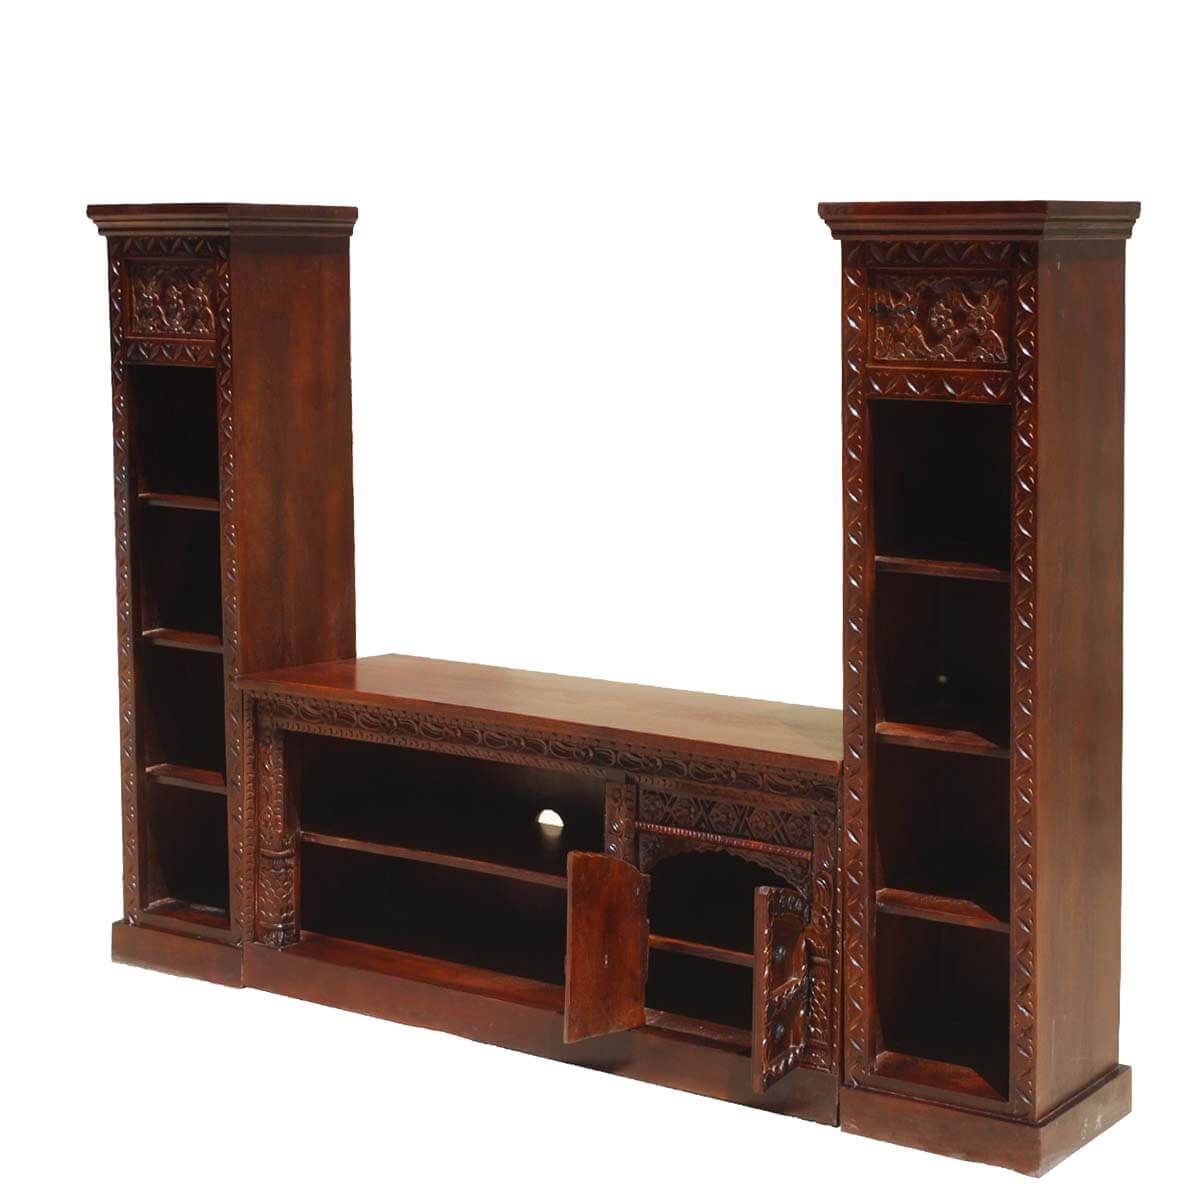 Rustic Solid Wood Twin Bookcase Media Console Tv Stand Throughout Tv Stands Bookshelf Combo (View 8 of 15)